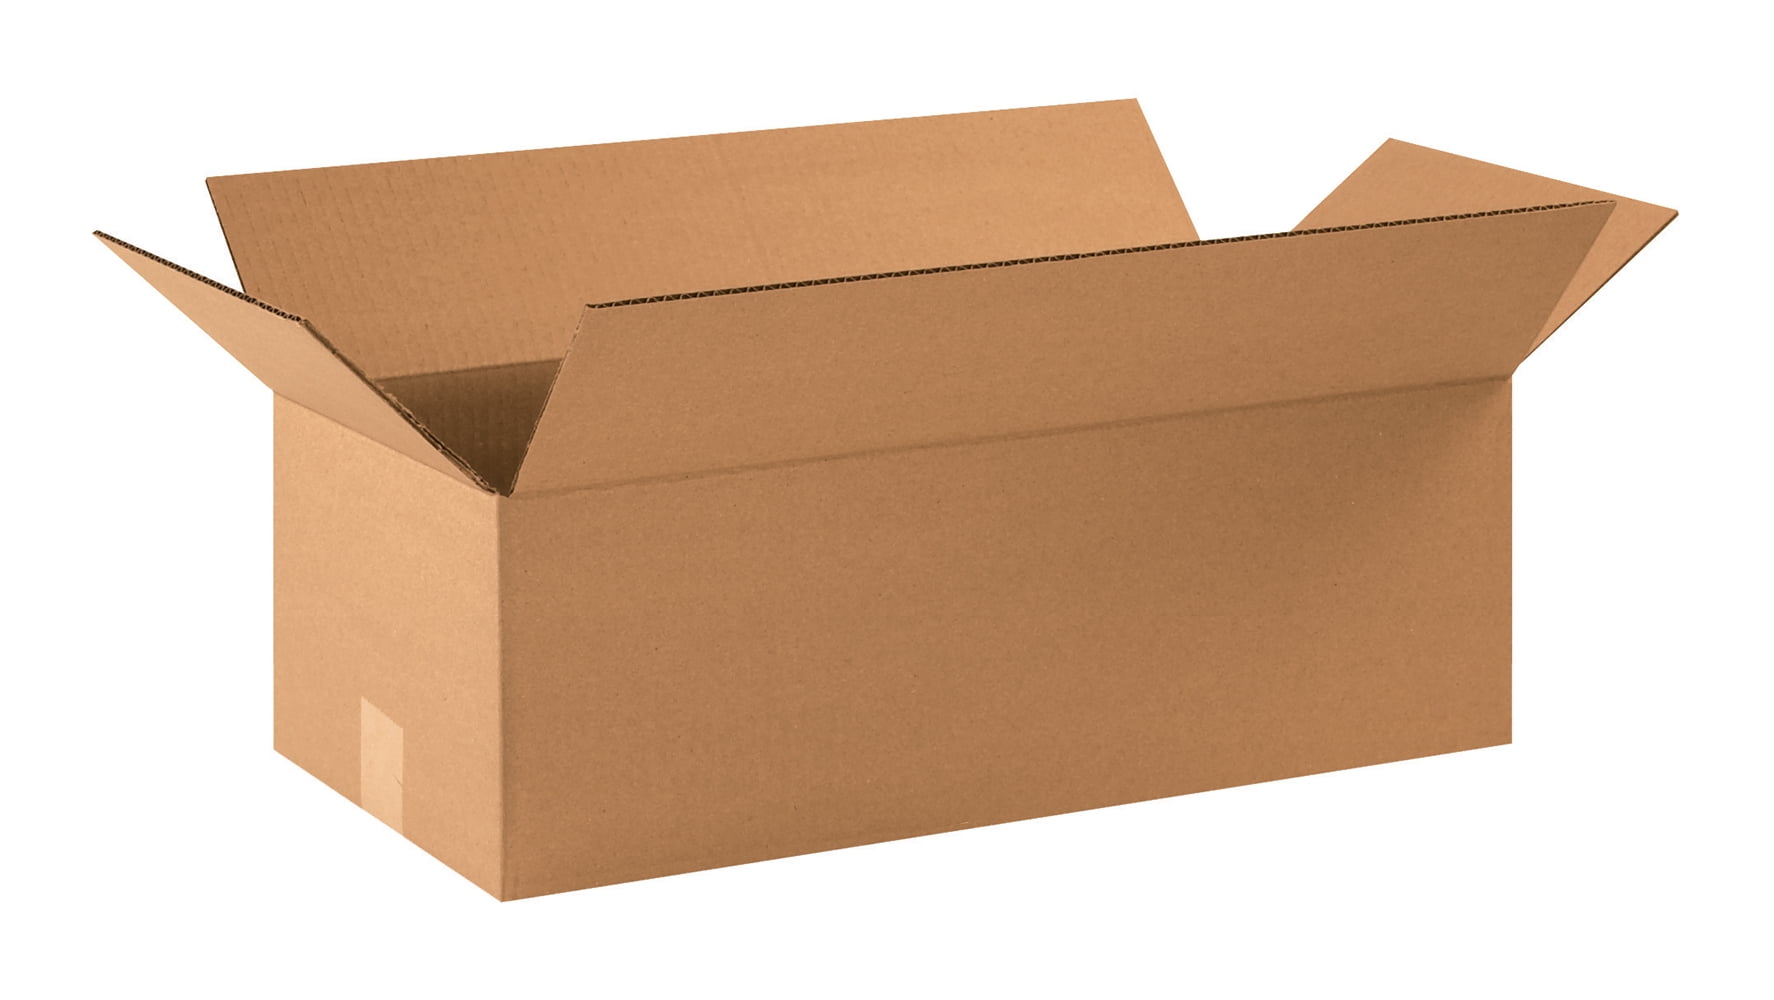 18x6x6 shipping moving packing boxes 25 ct